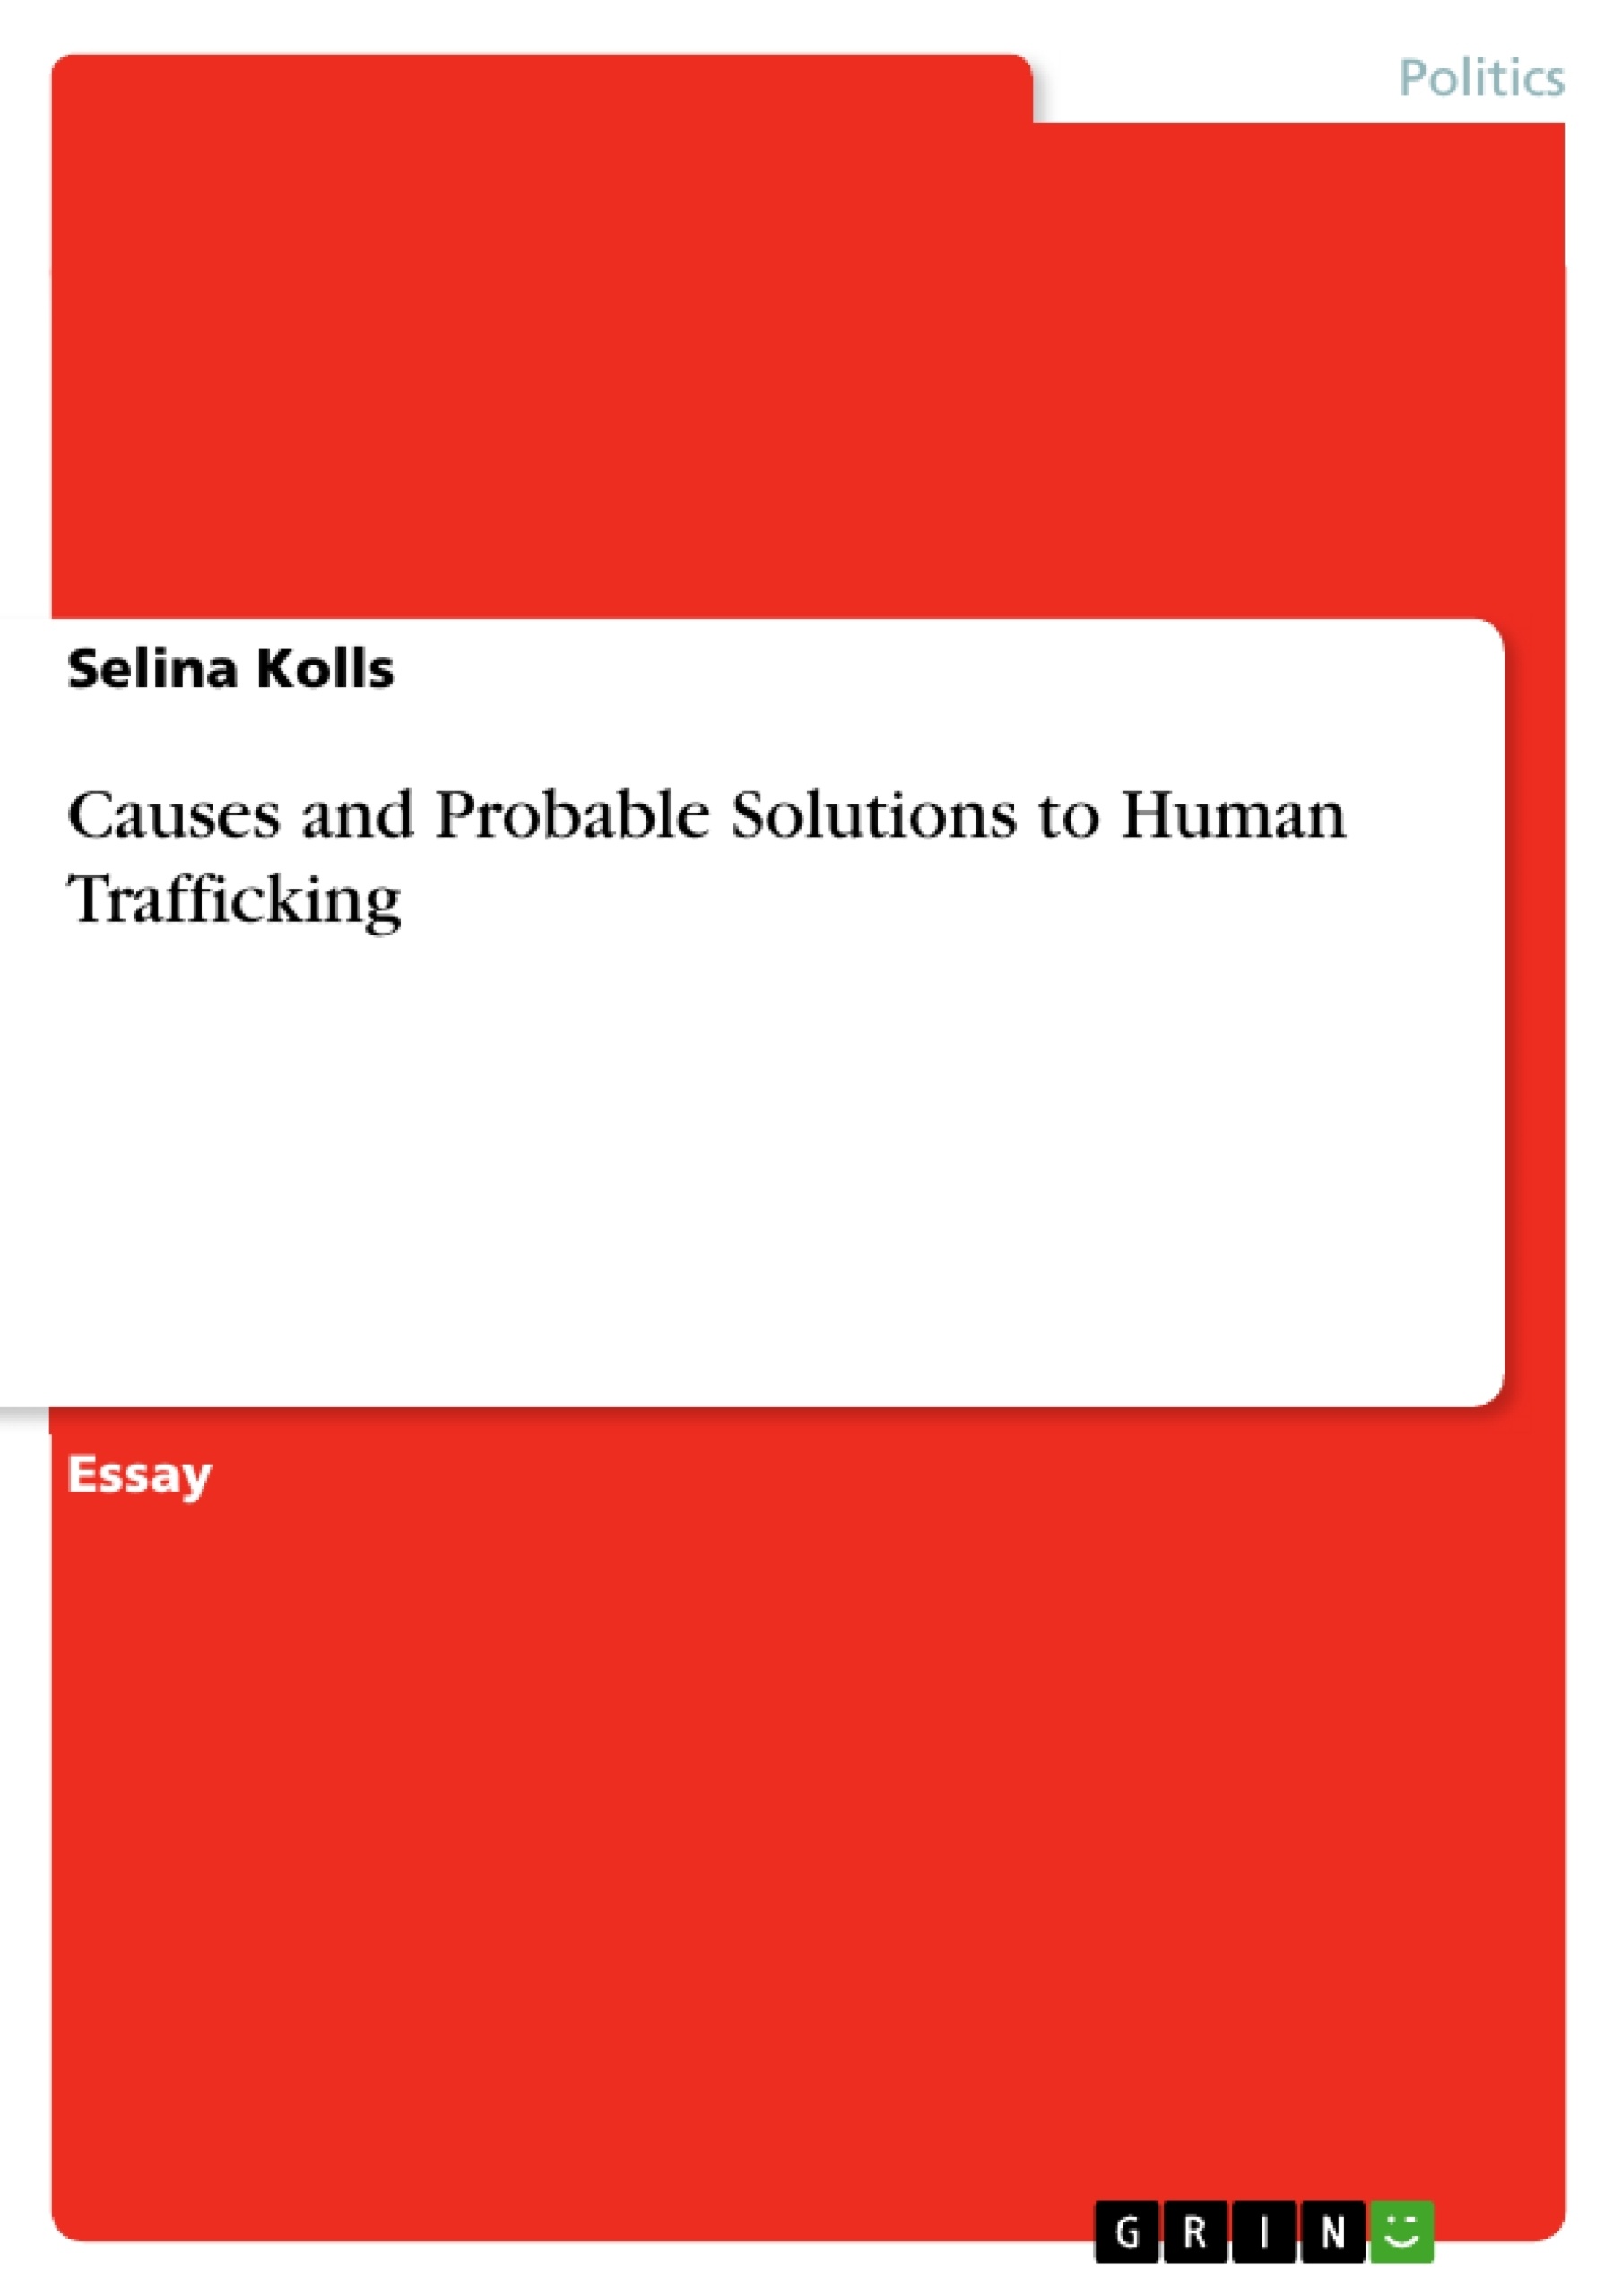 Título: Causes and Probable Solutions to Human Trafficking